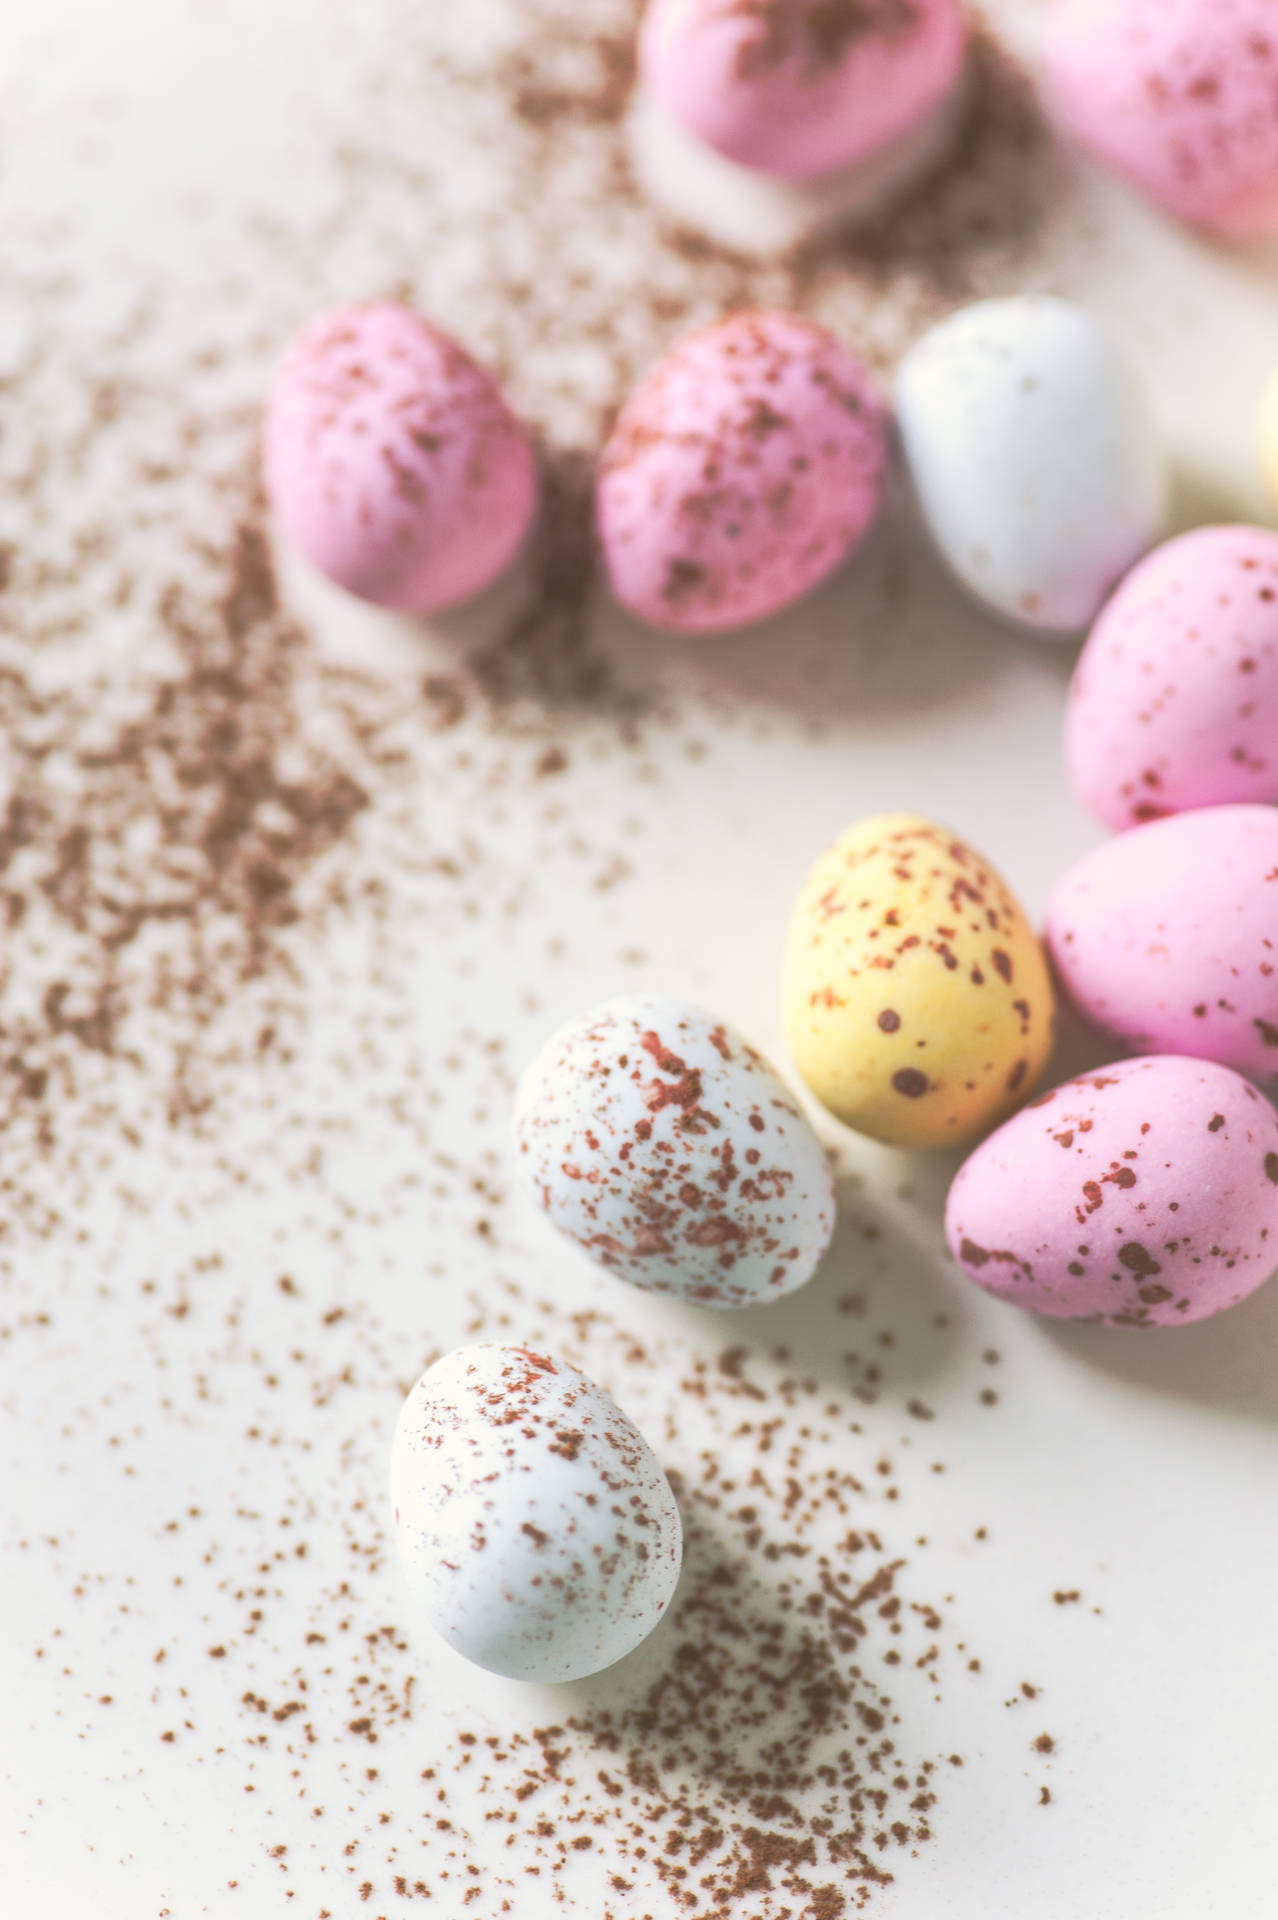 Celebrate Easter With Chocolate-covered Eggs! Background